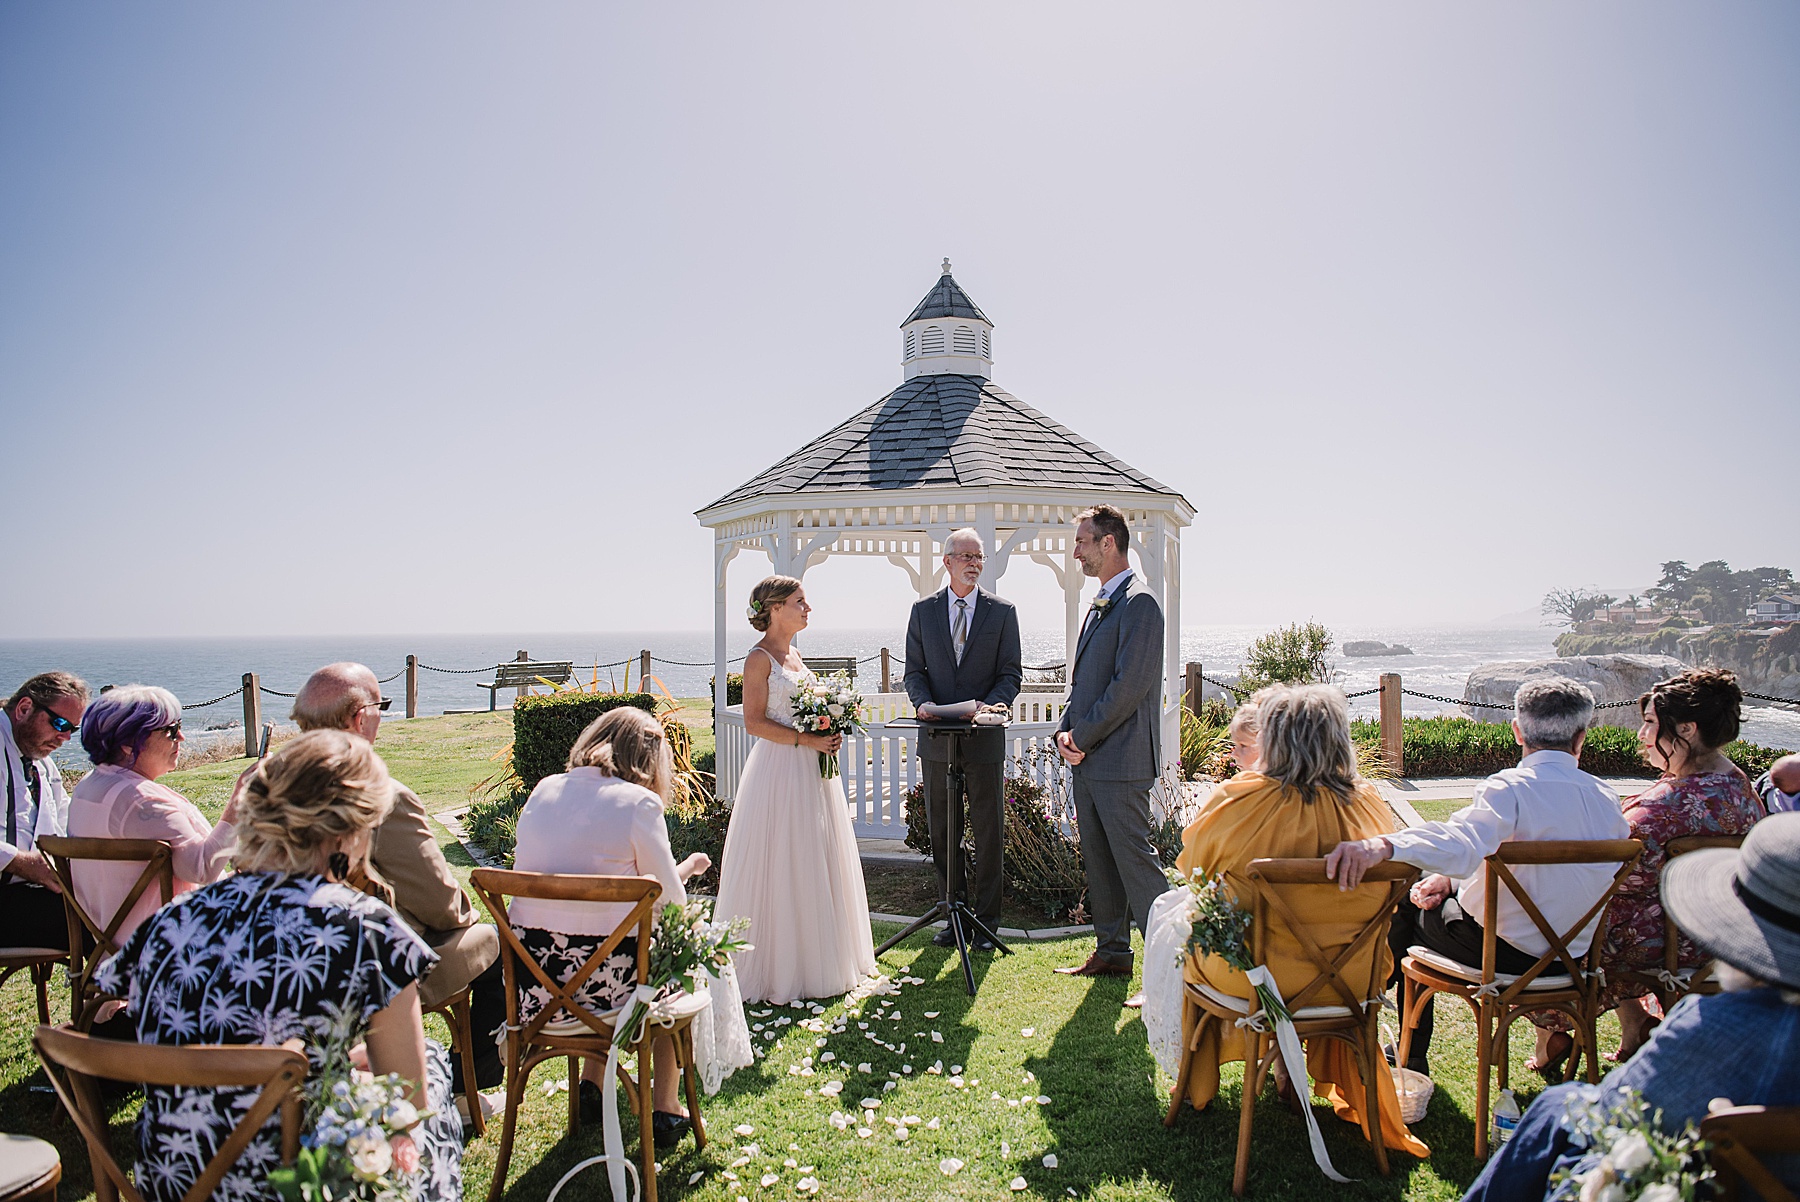 Nikkles Photography, a California wedding photographer, shares her tips for building a perfect wedding day timeline for your wedding.